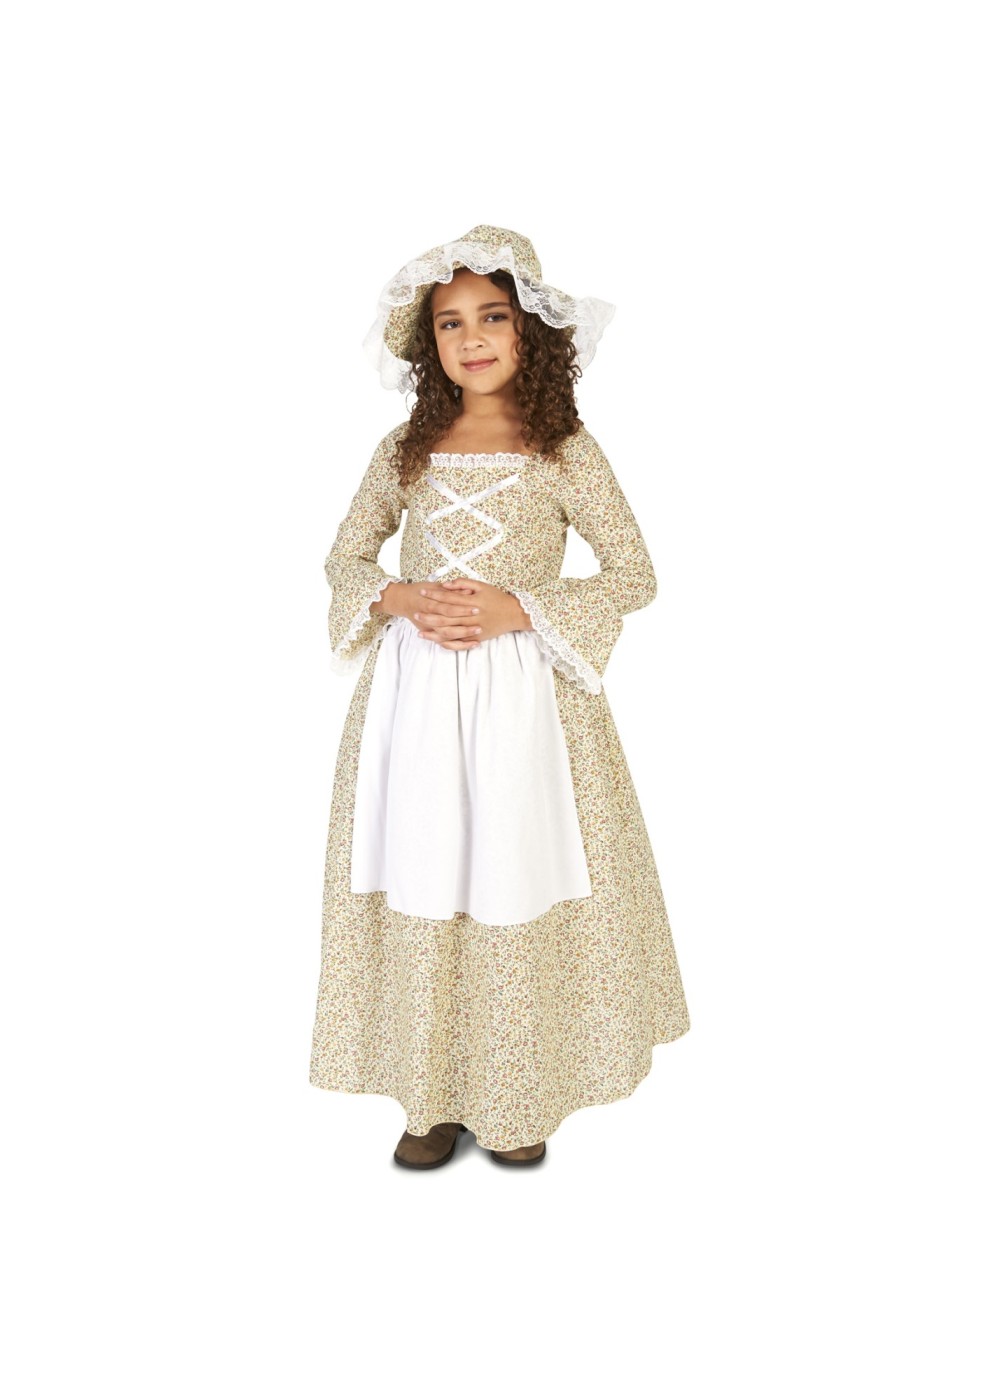 Girl's Colonial Dress Costume - Large